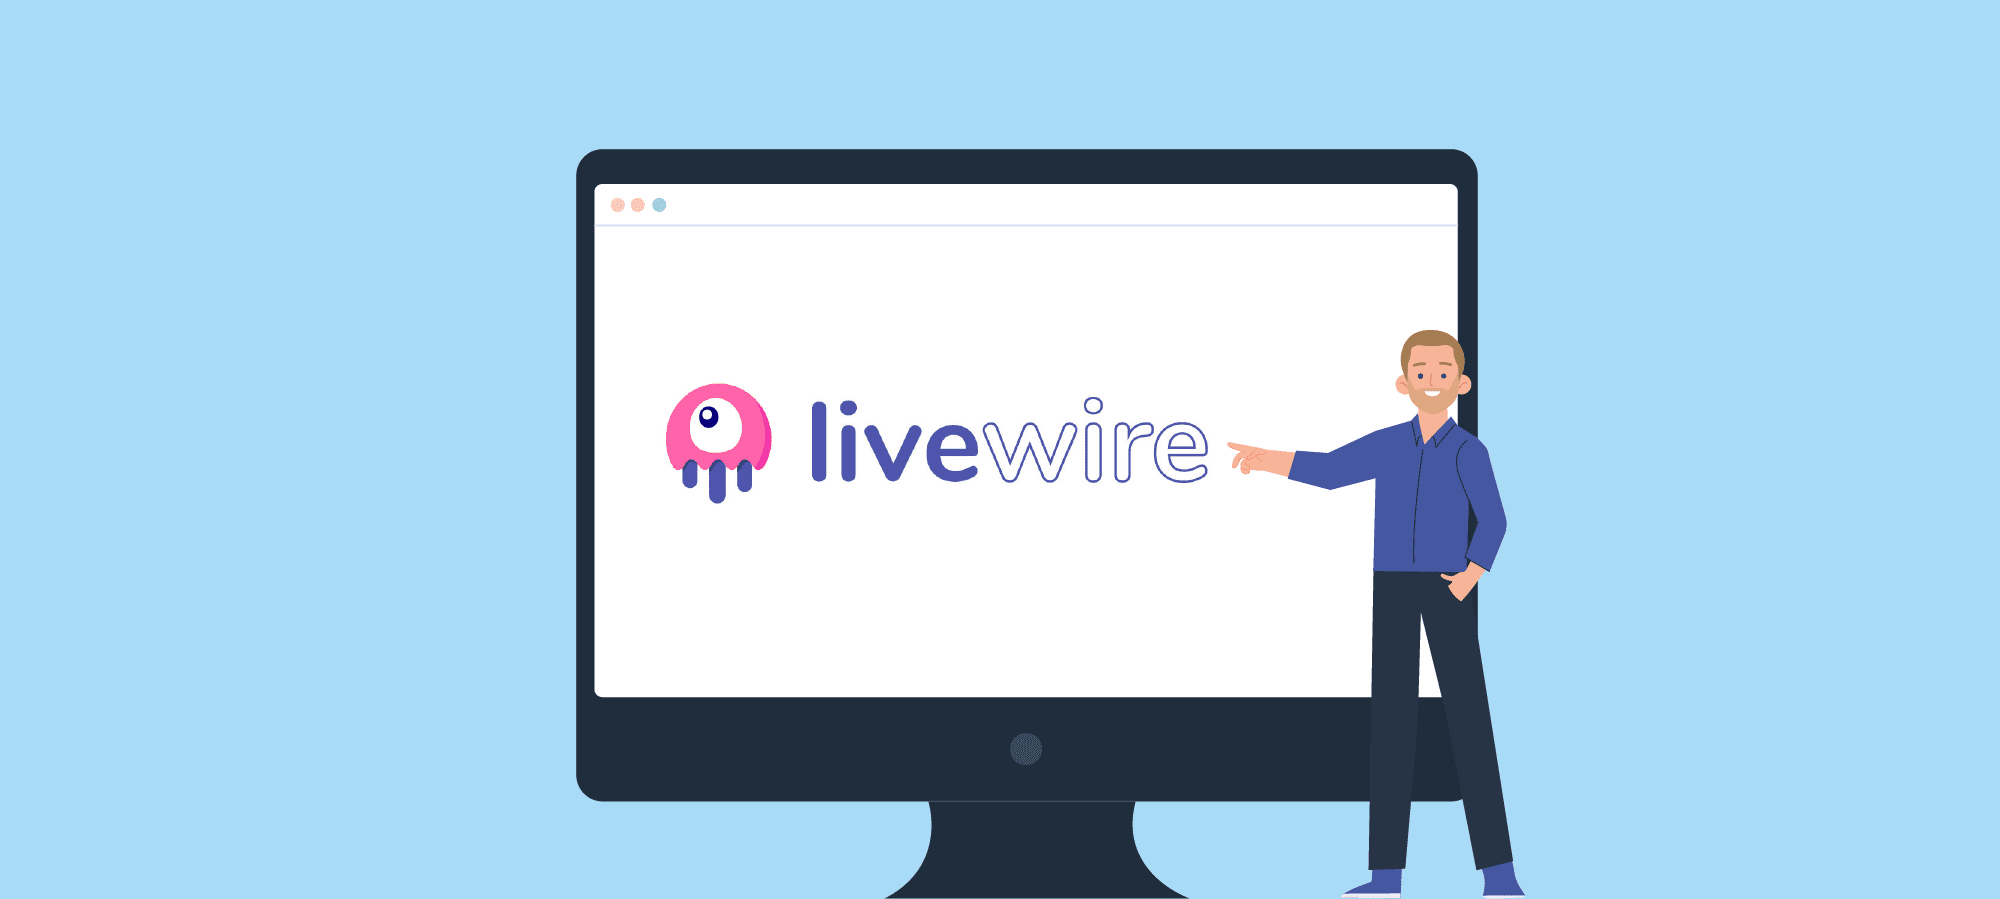 Laravel Livewire Shopping Cart Demo - Step by Step Guide